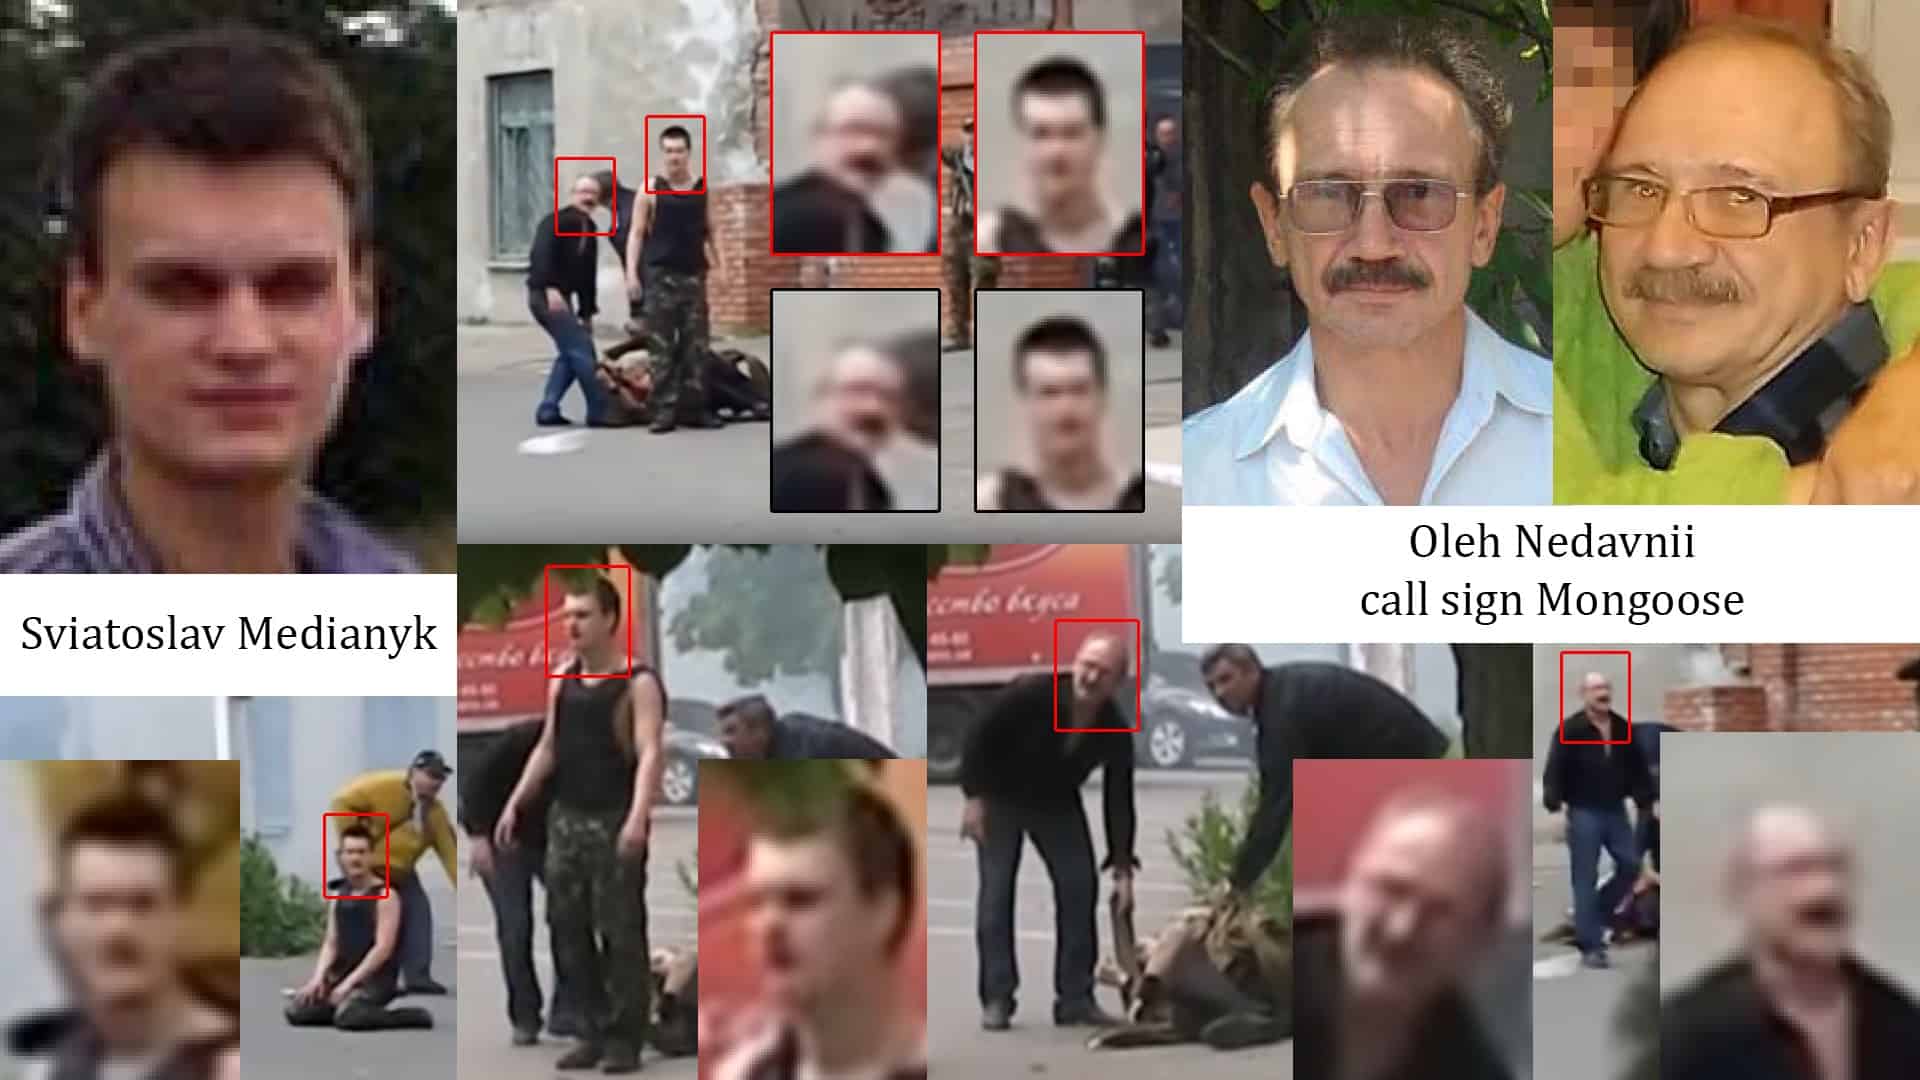 Oleh Nedavnii, call sign Mongoose, and Sviatoslav Medianyk near the Police HQ. 9 May, 1:18pm. © Unknown authors of the original videos. Photo: Myrotvorets.